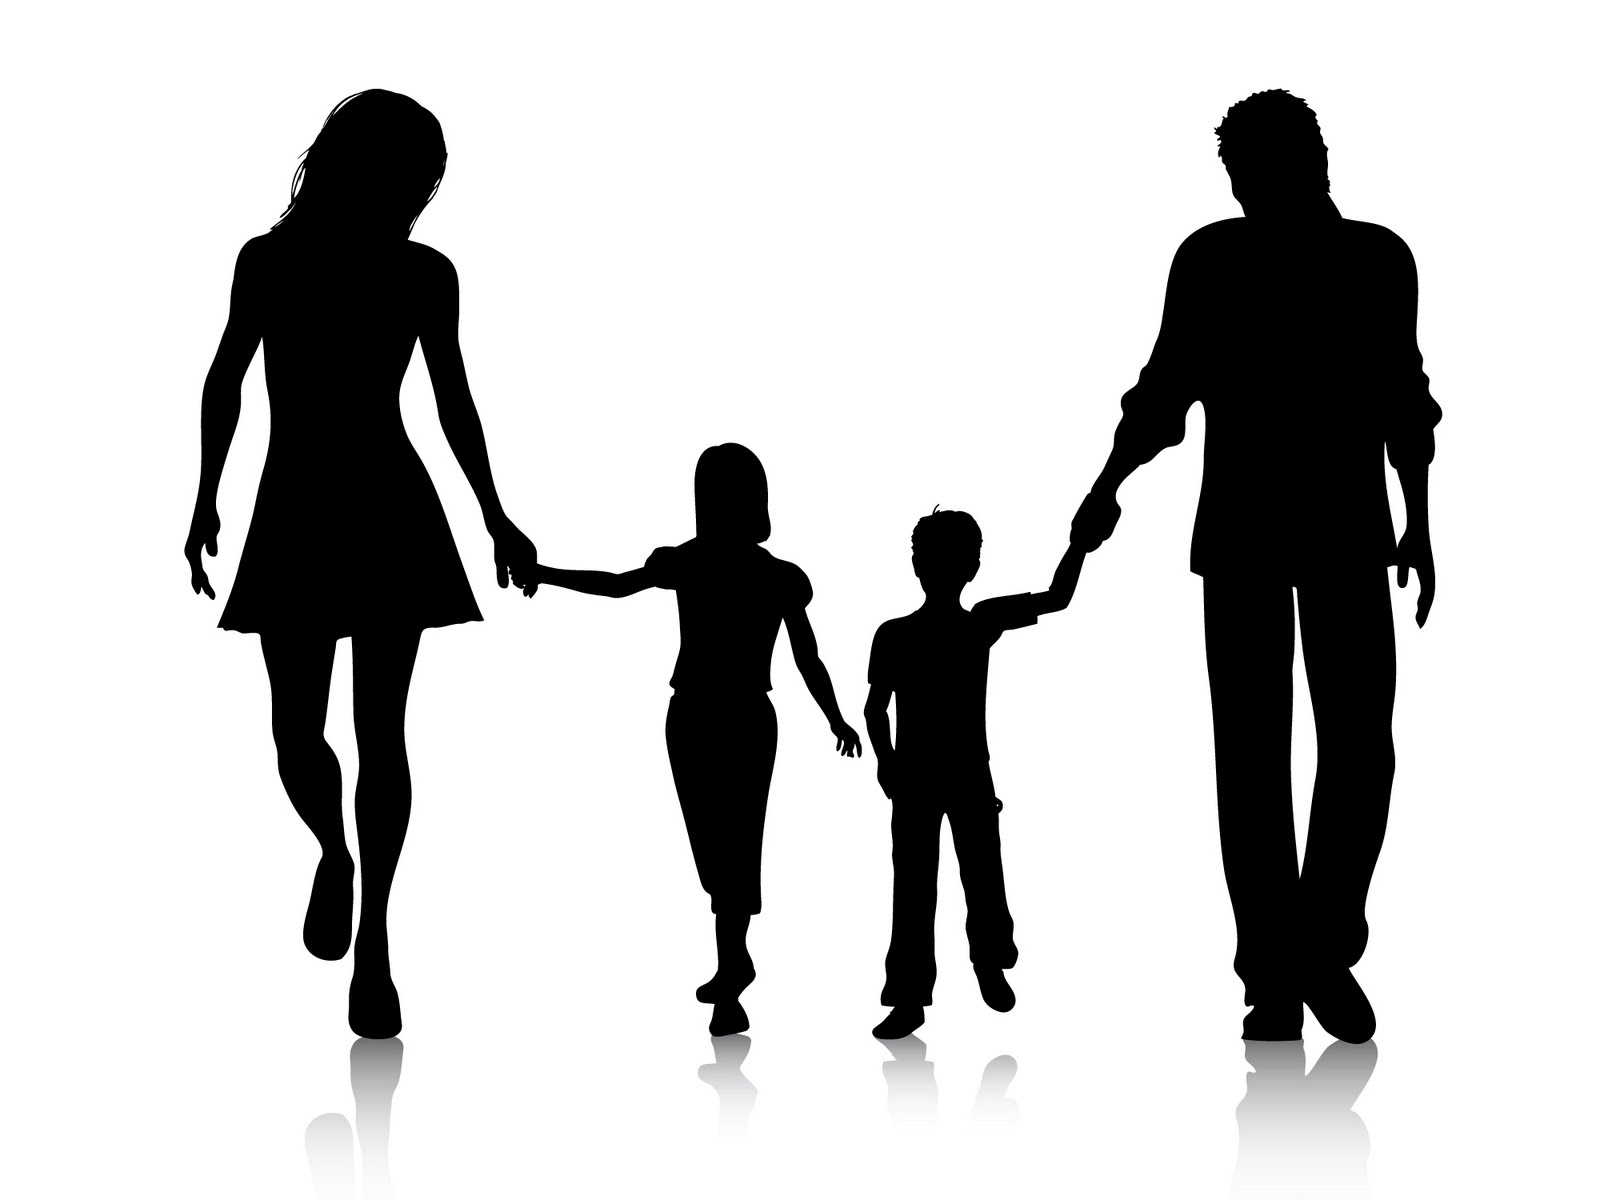 Family Cartoon Black And White - ClipArt Best